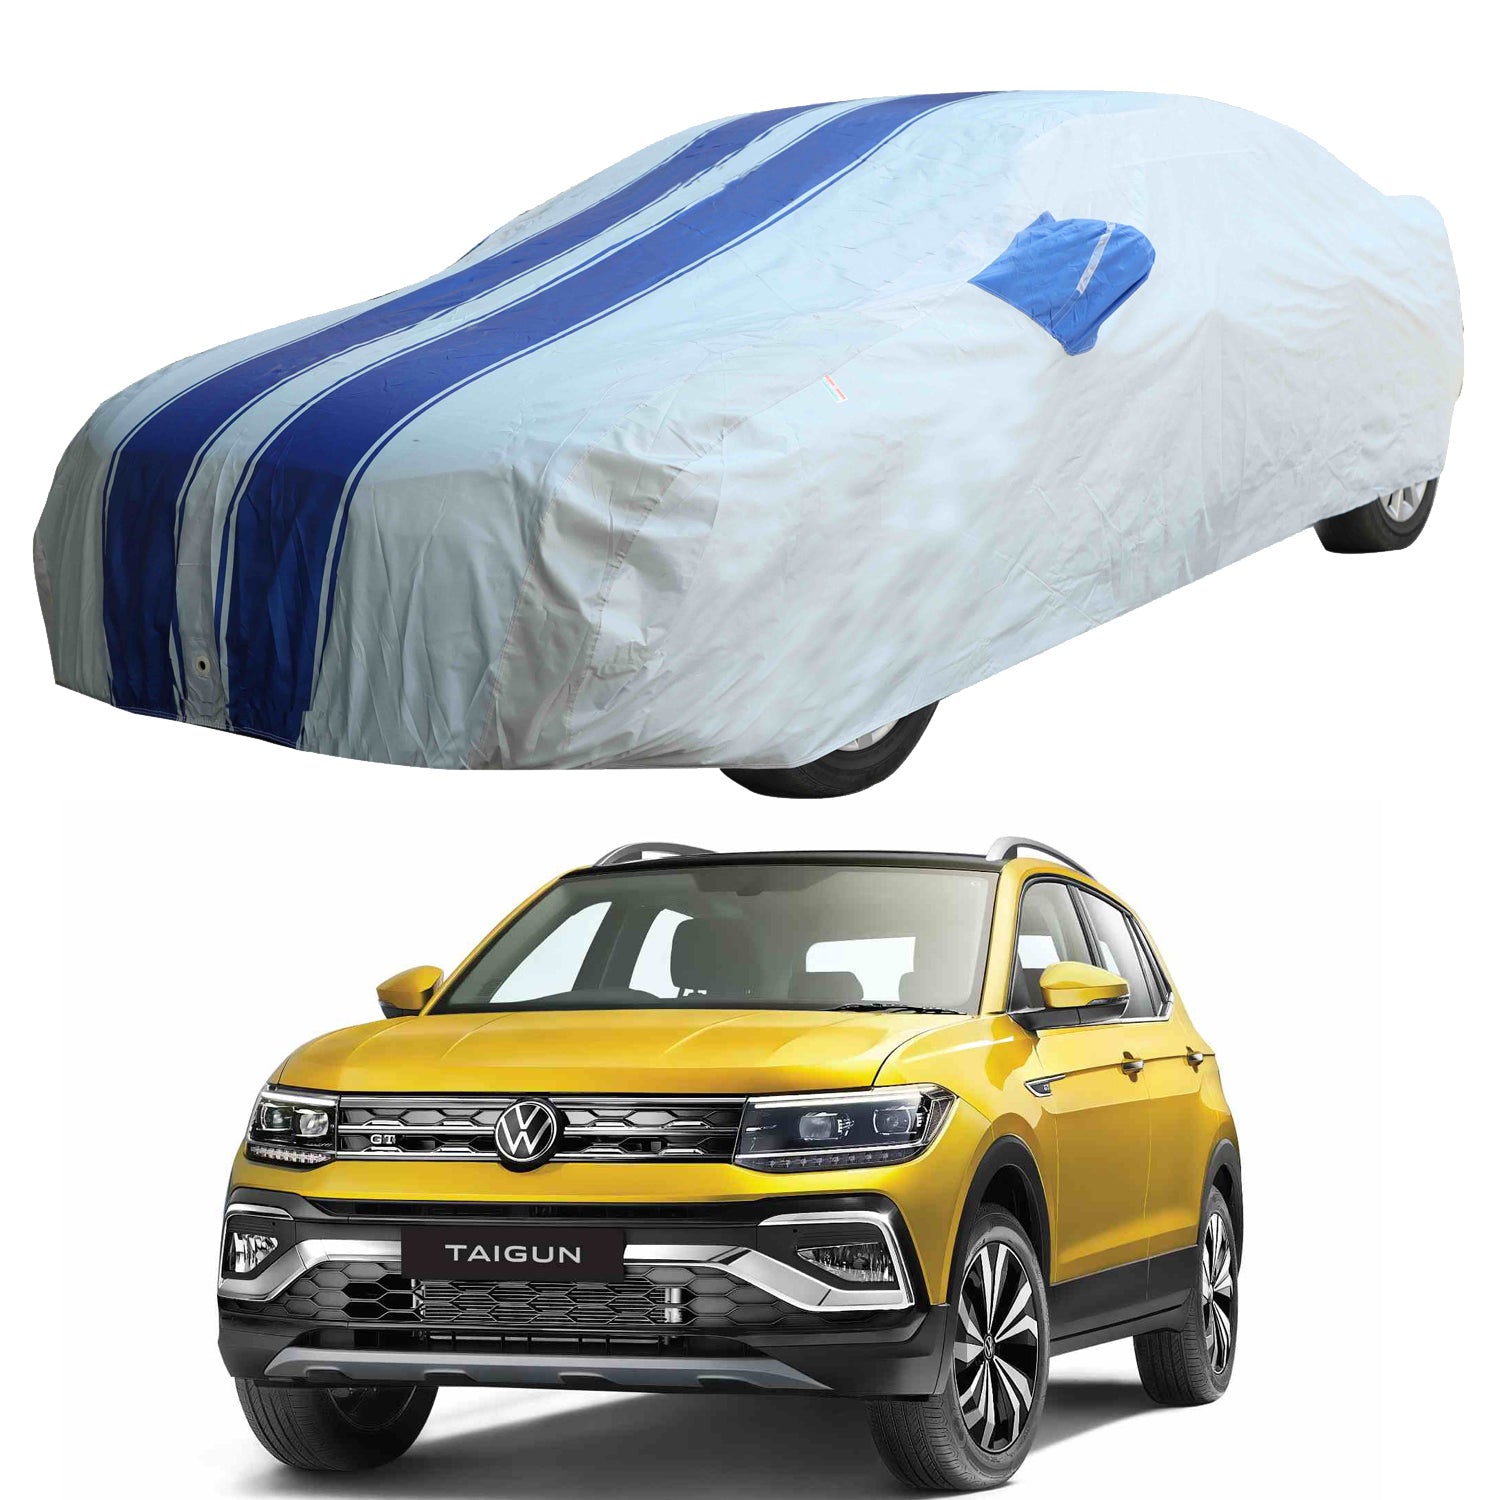 Oshotto 100% Blue dustproof and Water Resistant Car Body Cover with Mi